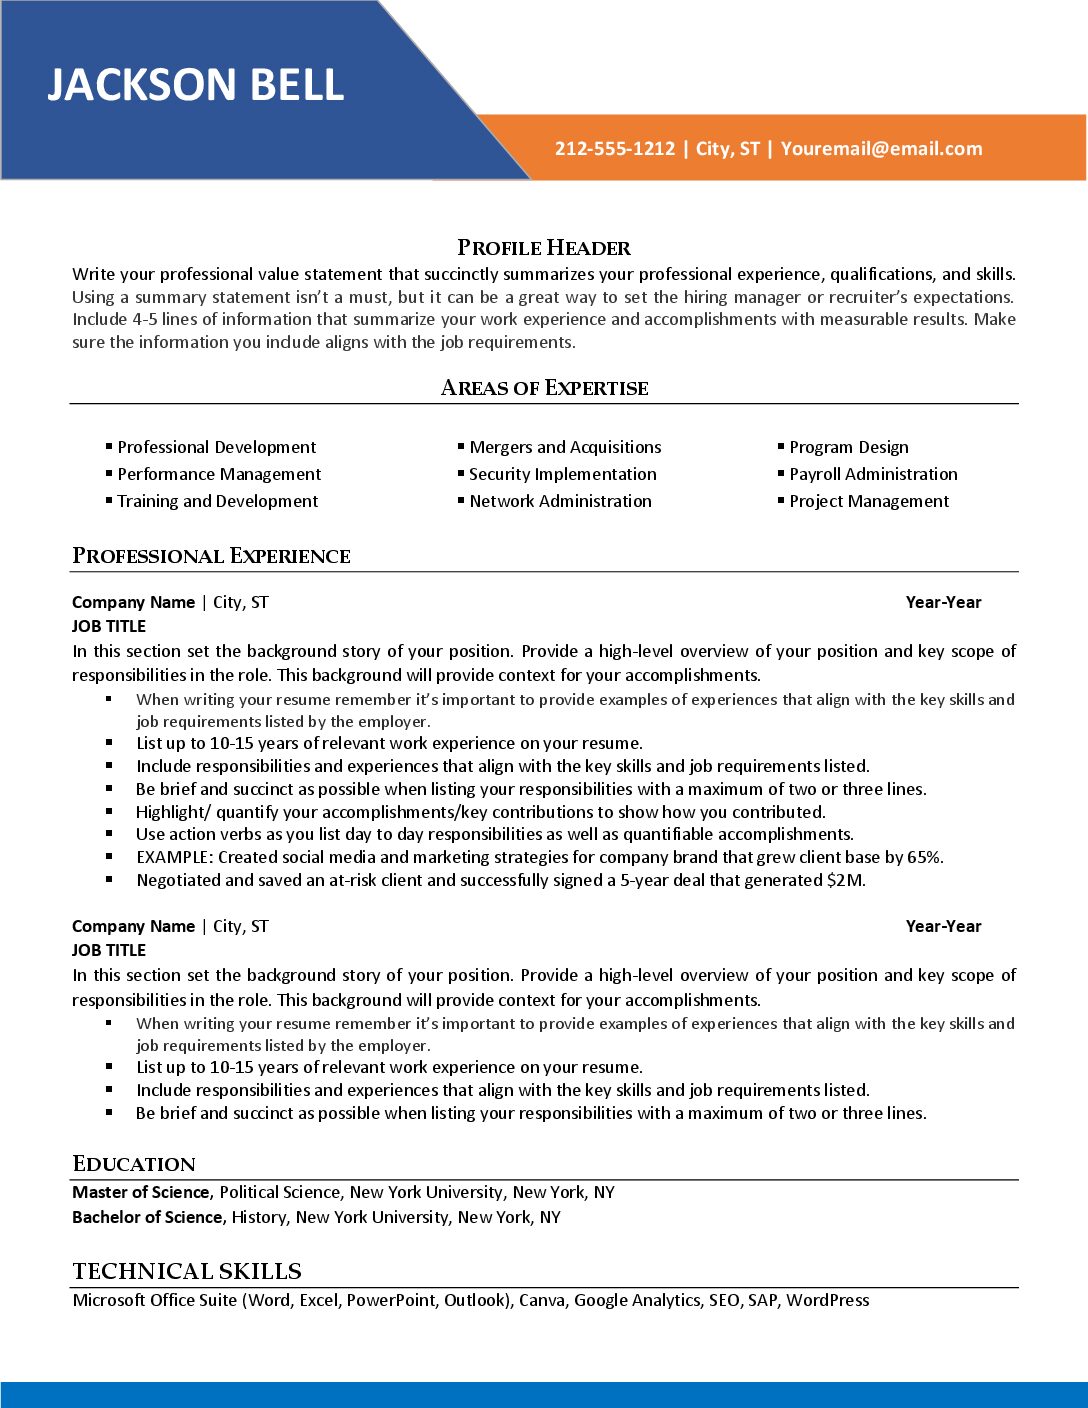 Oxford Resume Template thumb